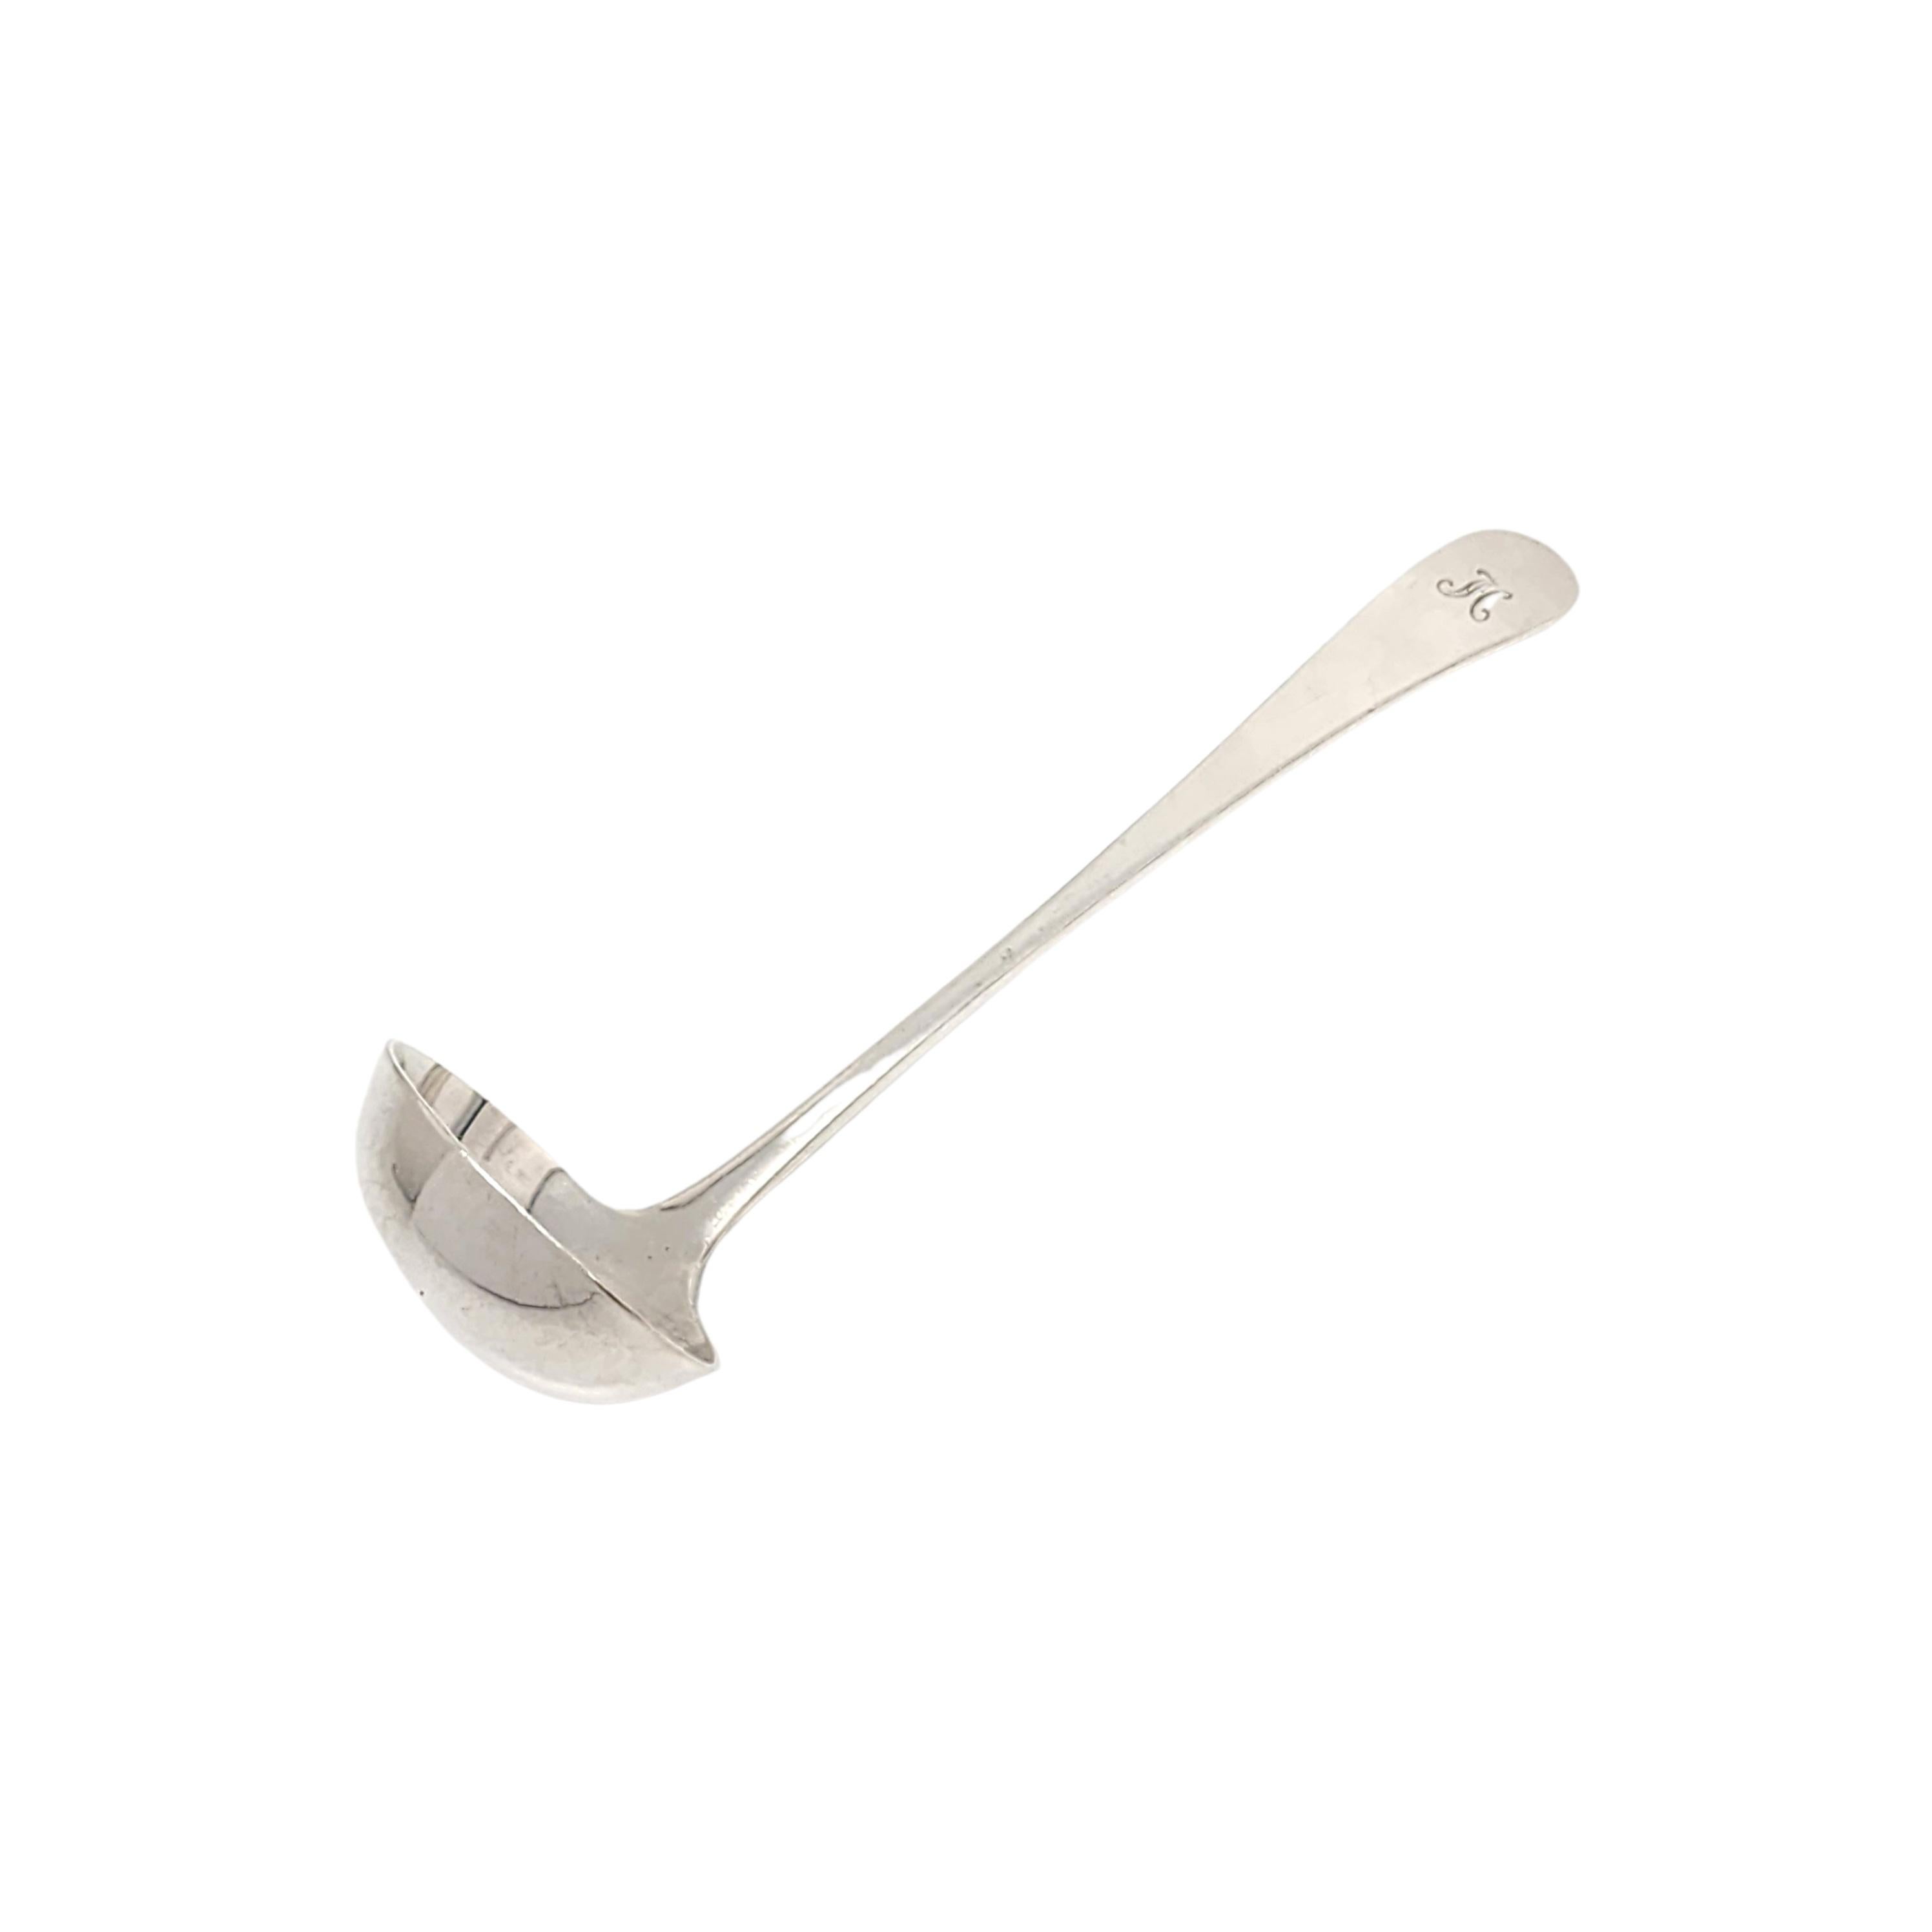 Tiffany & Co Sterling Silver Reproduction Edinborough Ladle with Monogram 'C' For Sale 3